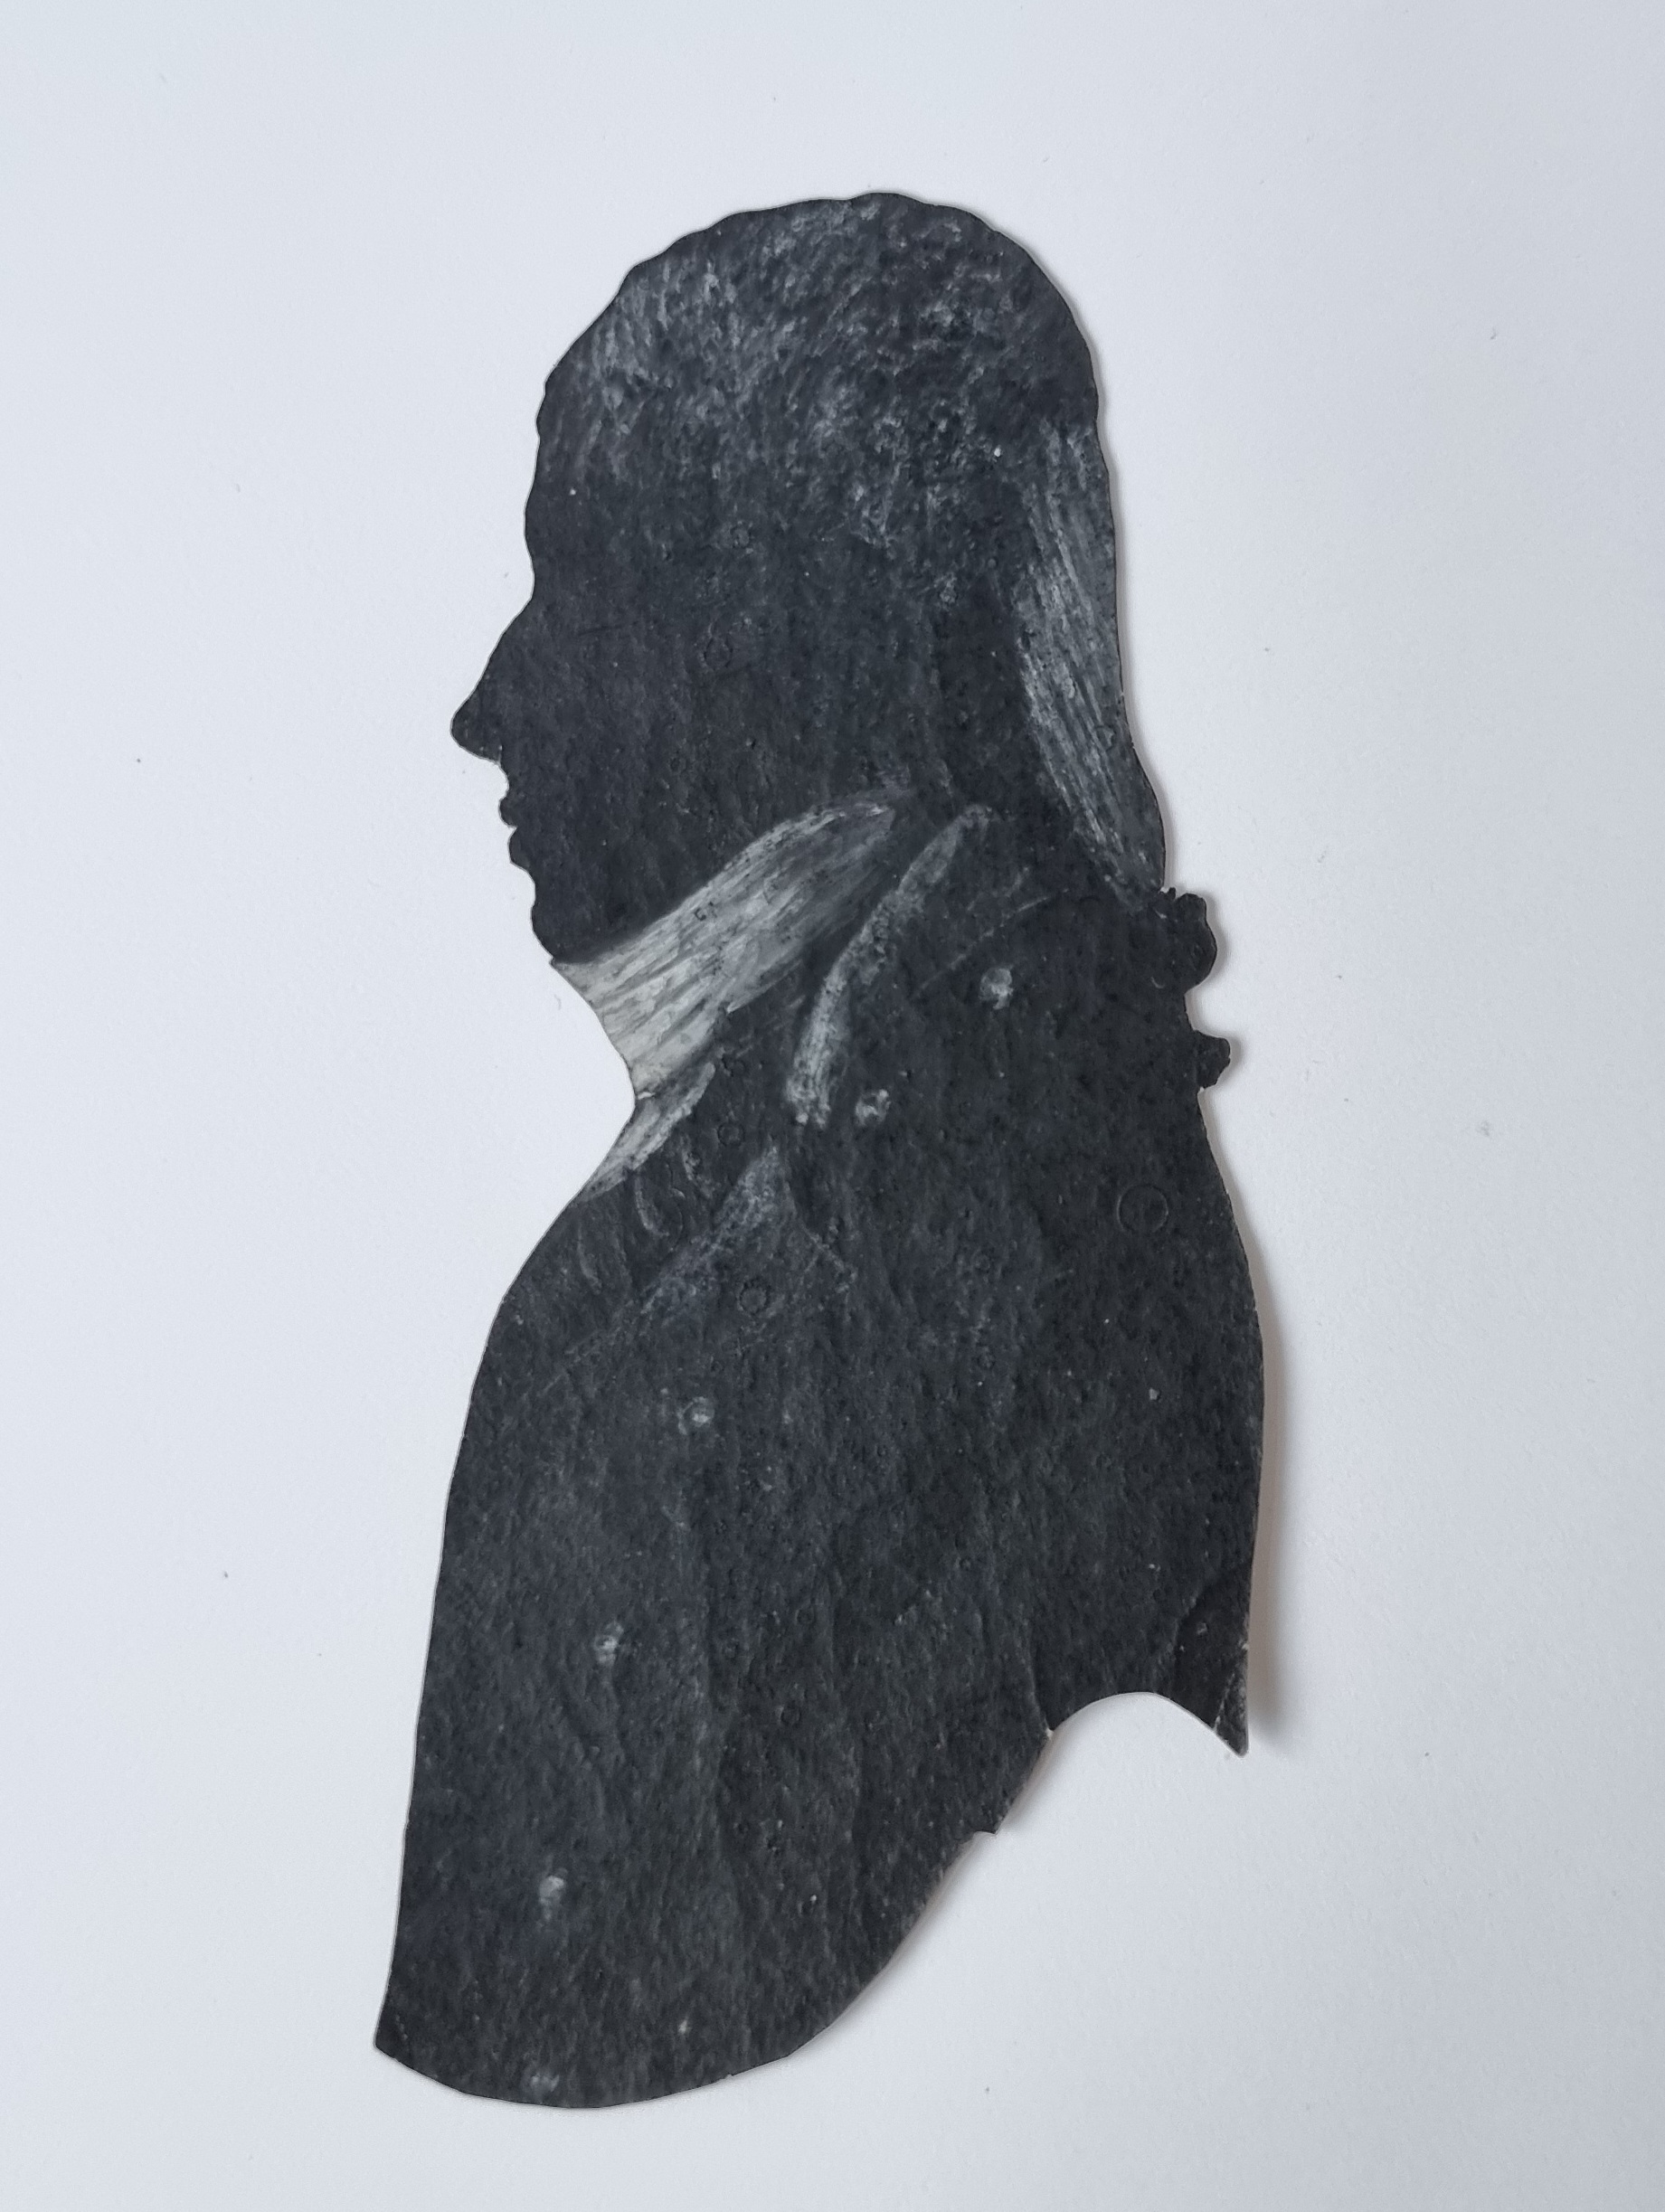 [Silhouette portraits] A woman with cap and a man, late 18th / early 19th century.